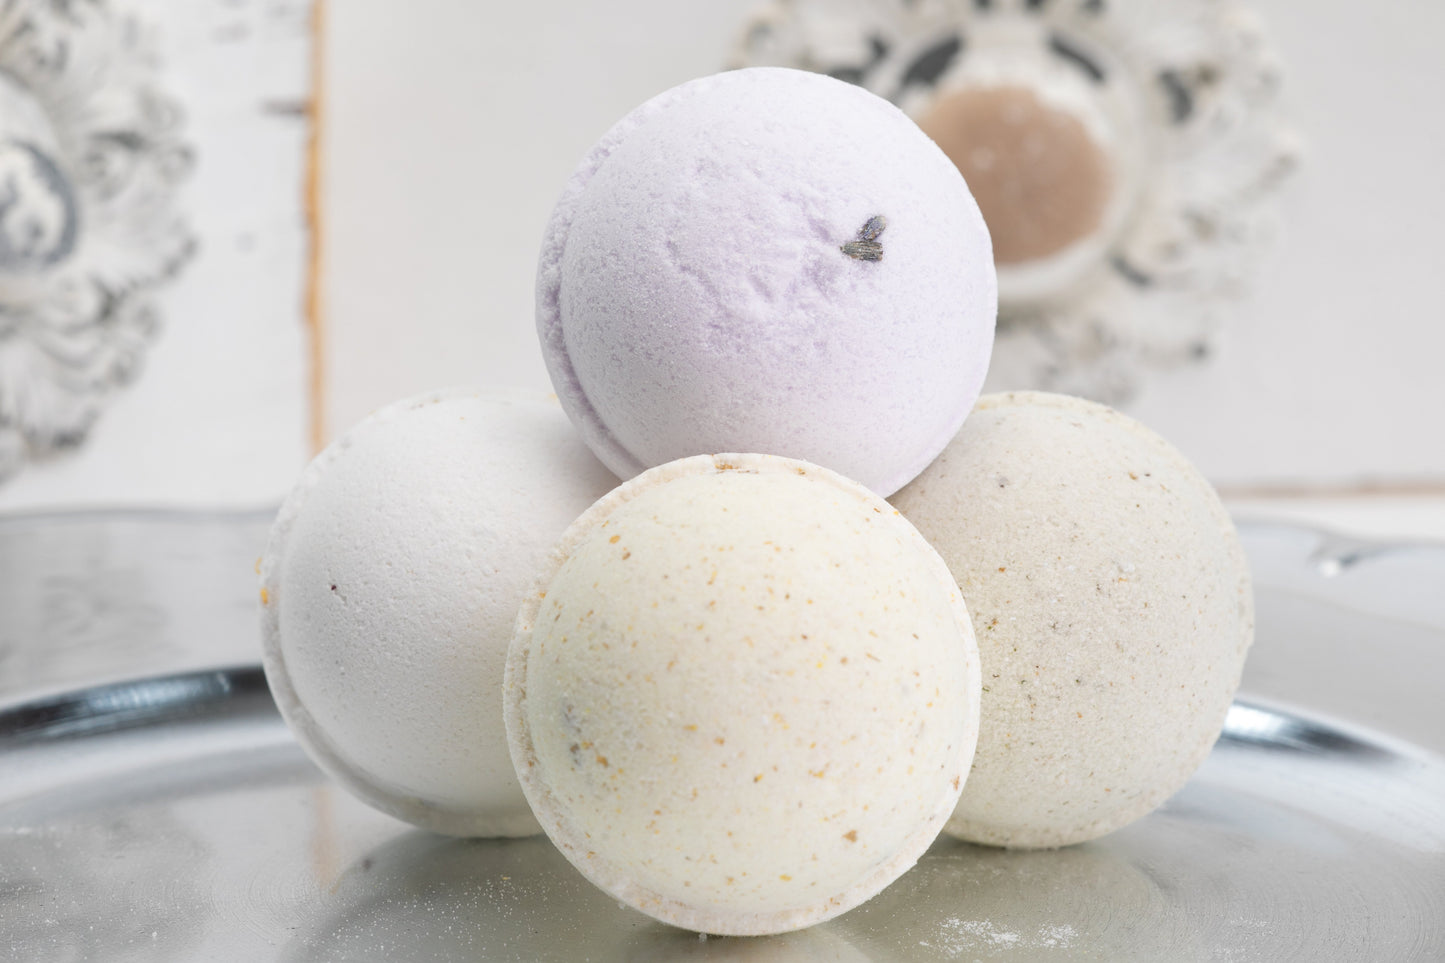 botanical bath bombs, naturally sourced, locally made, local small business, daylyn, boutique, newmarket, 